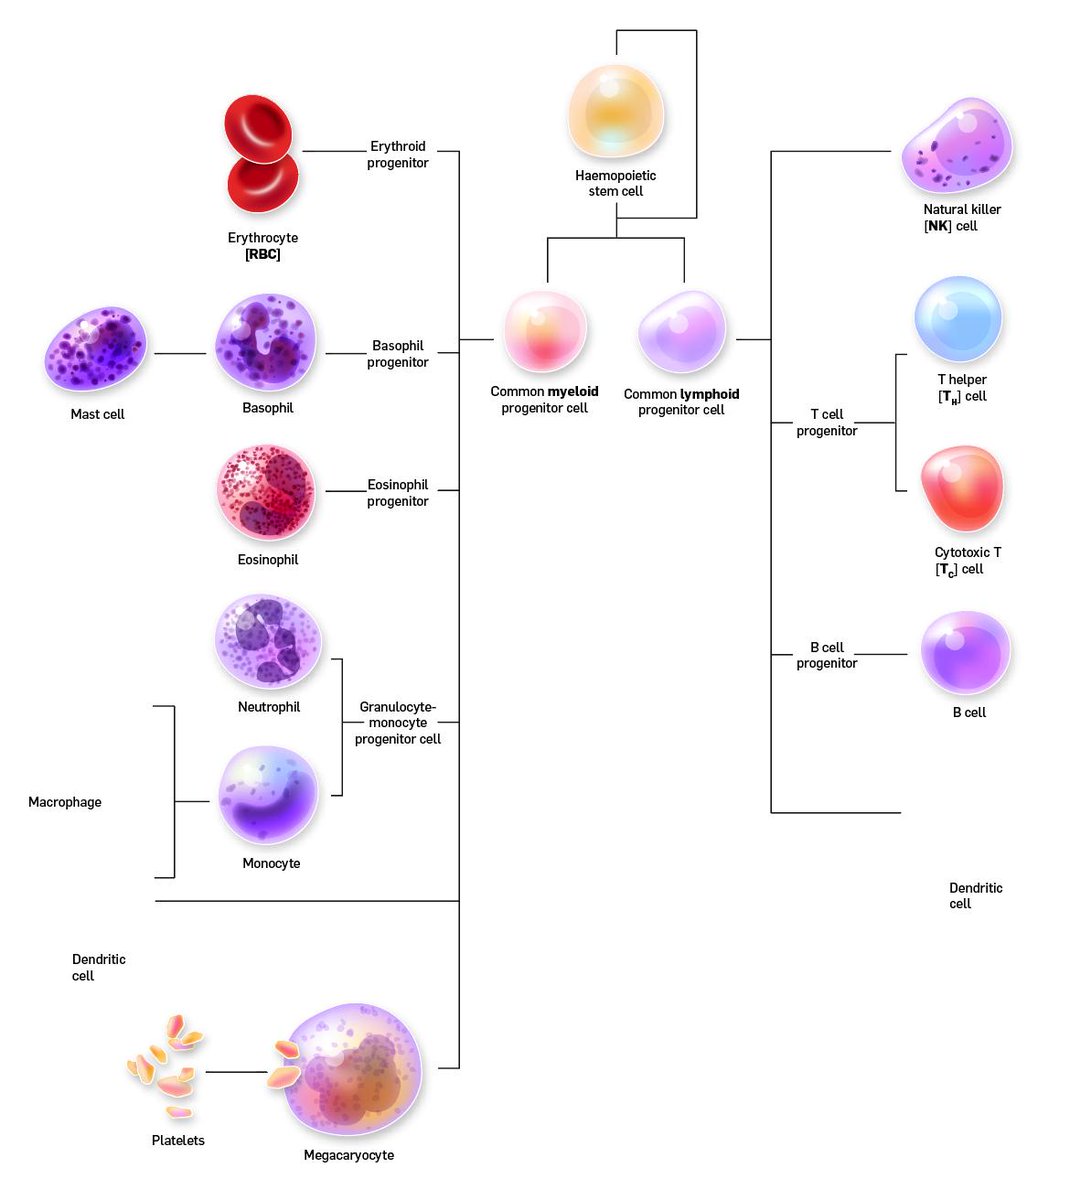 This #hematopoiesis #chart is taking shape. #Pseudopodia are still needed to be drawn. I also need to somehow show where the maturation processes happen. Haven't decided how yet. #stemcells #celldifferentiation #blood